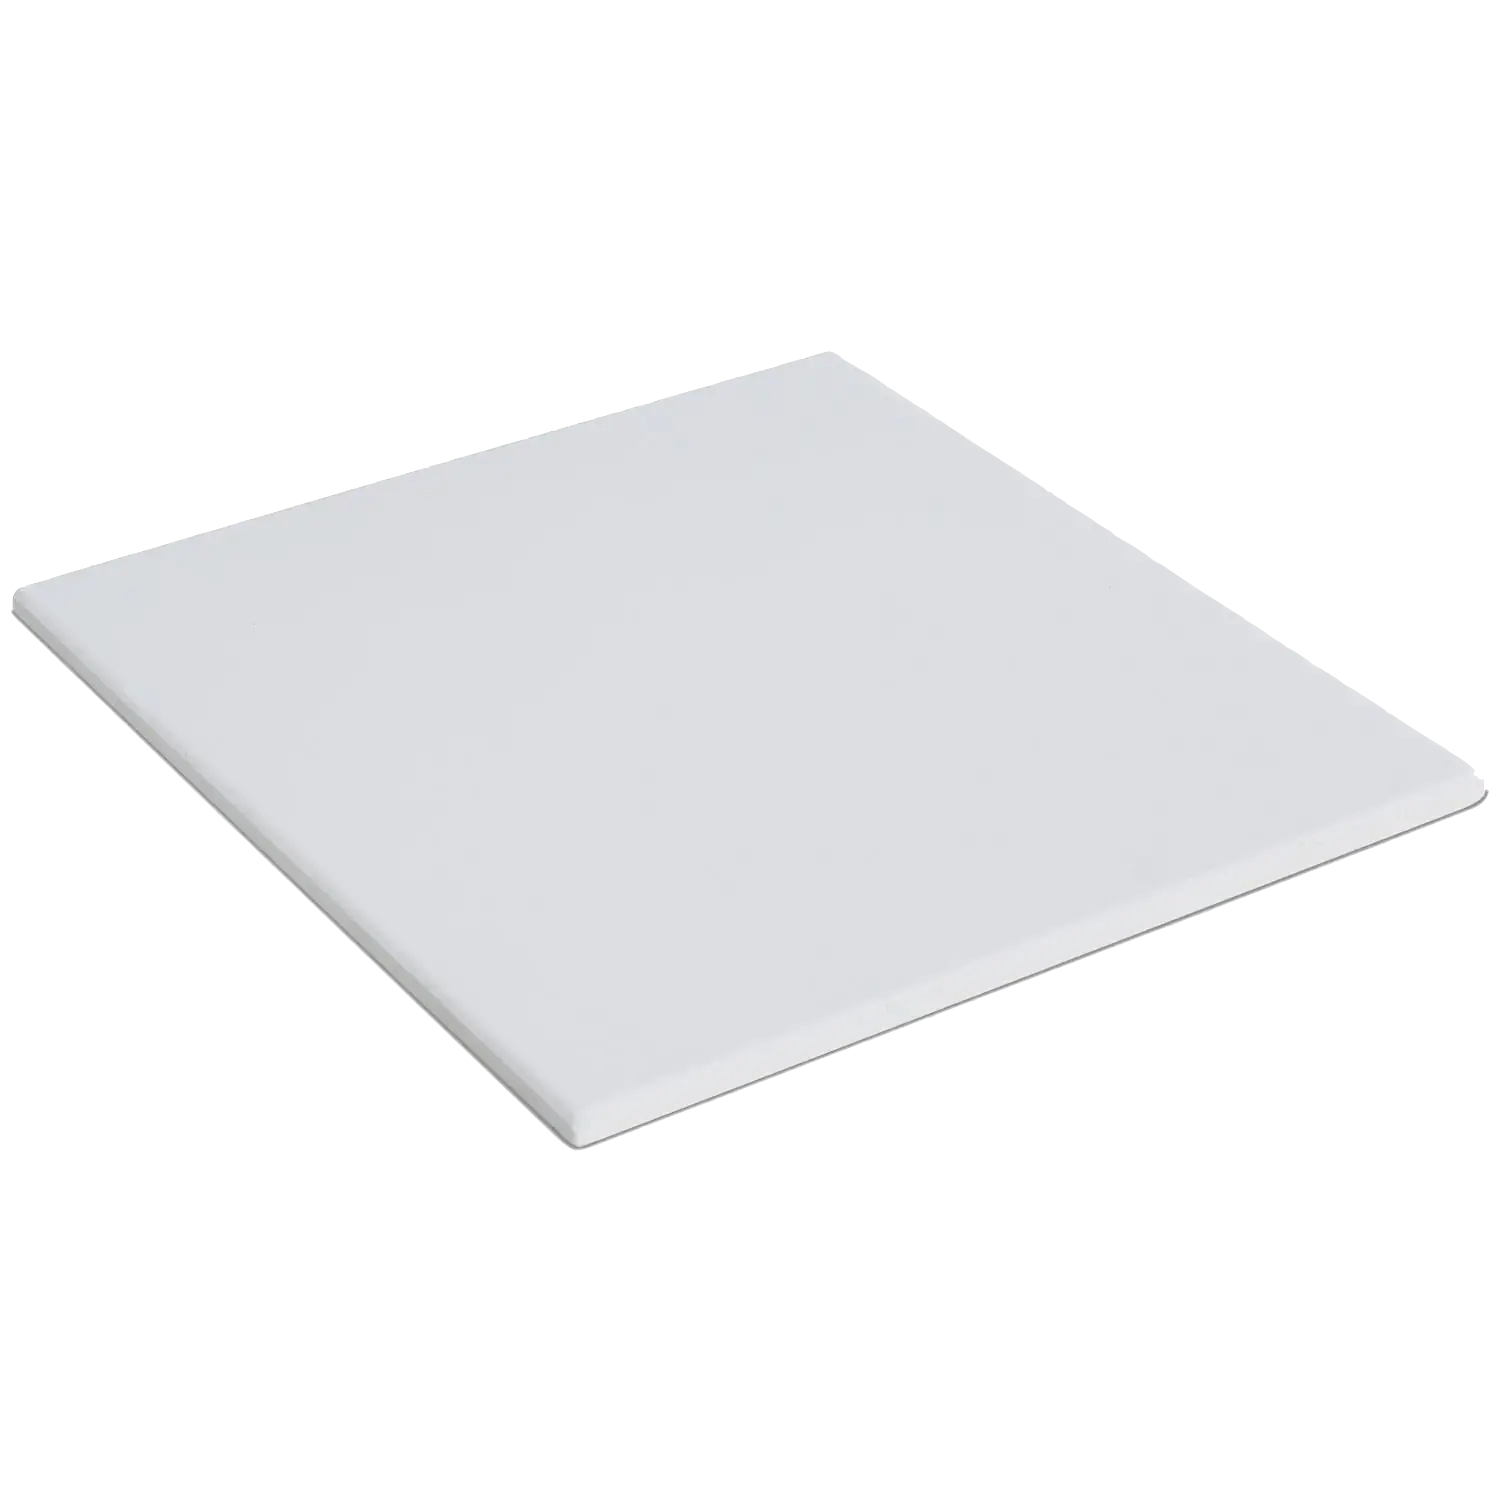 The square shaped white pizza cooking stone